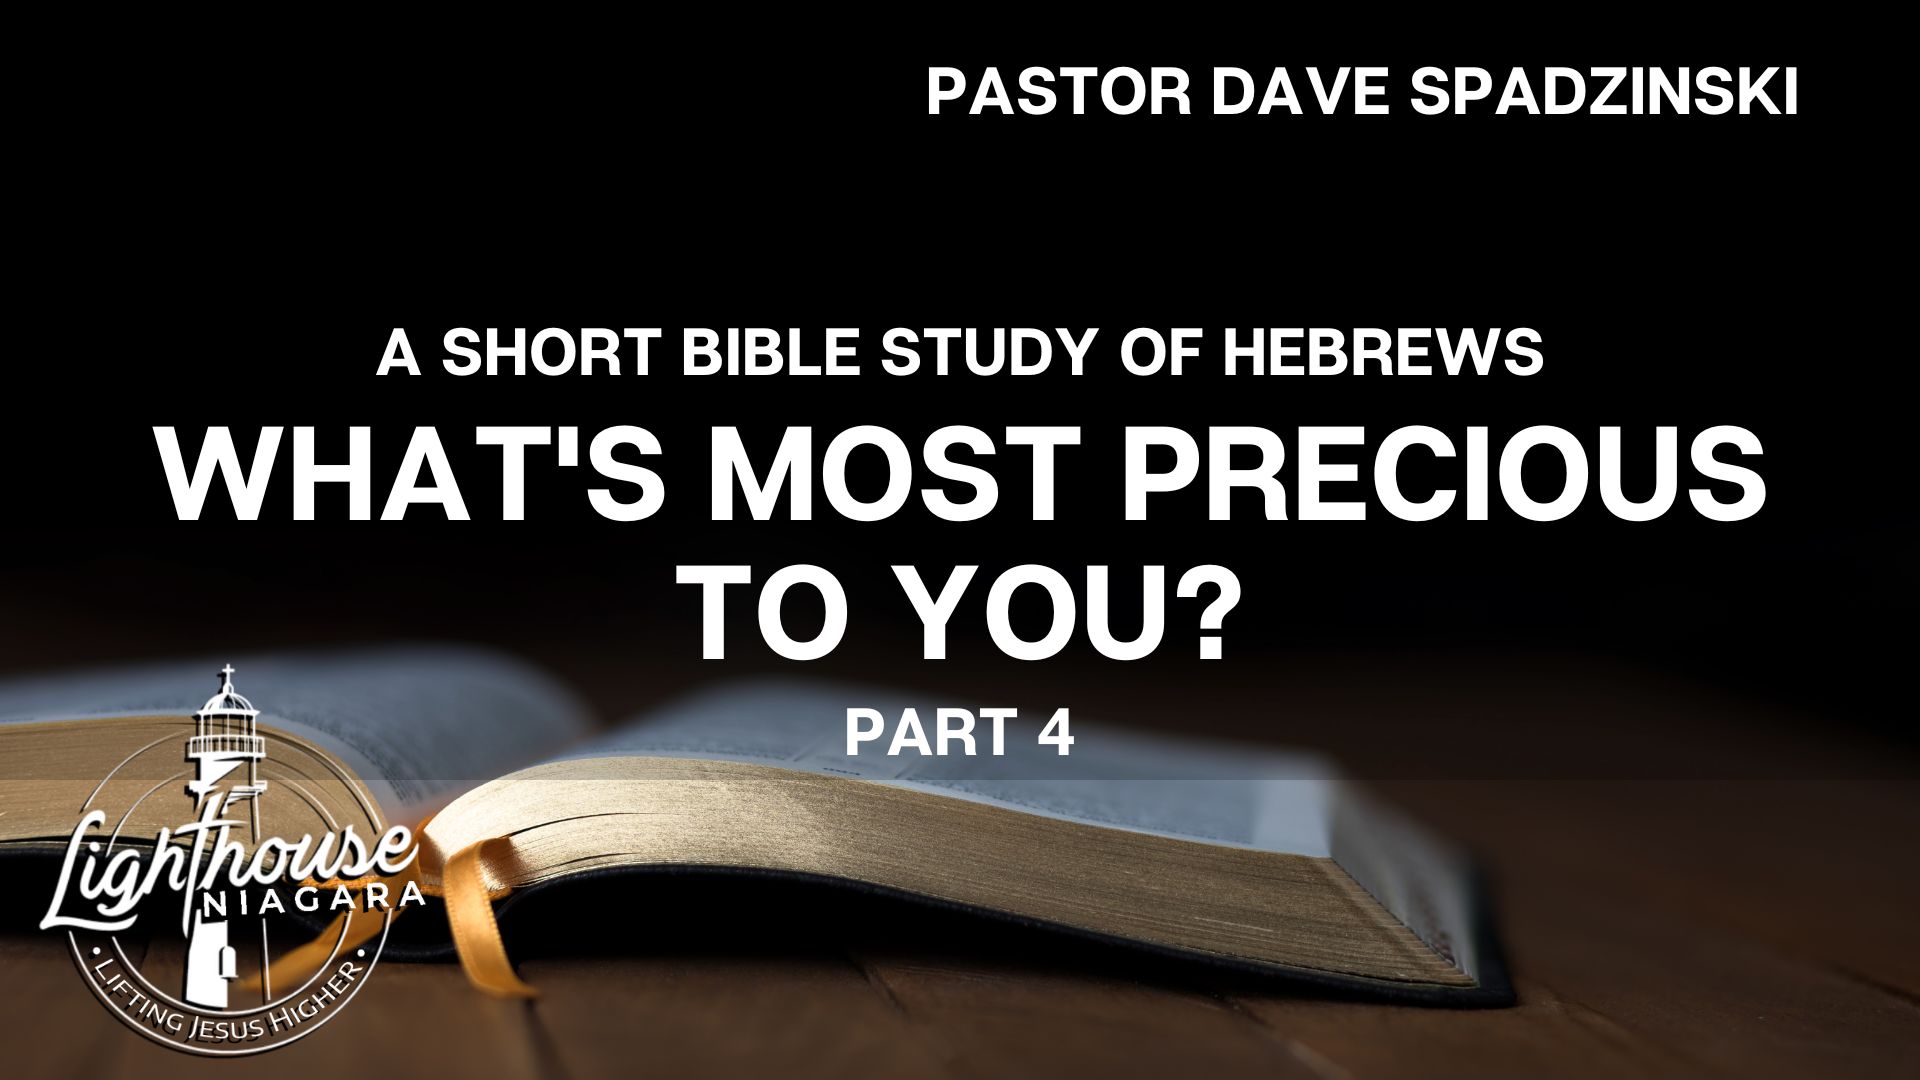 A Short Bible Study Of Hebrews: What's Most Precious To You? - Pastor Dave Spadzinski